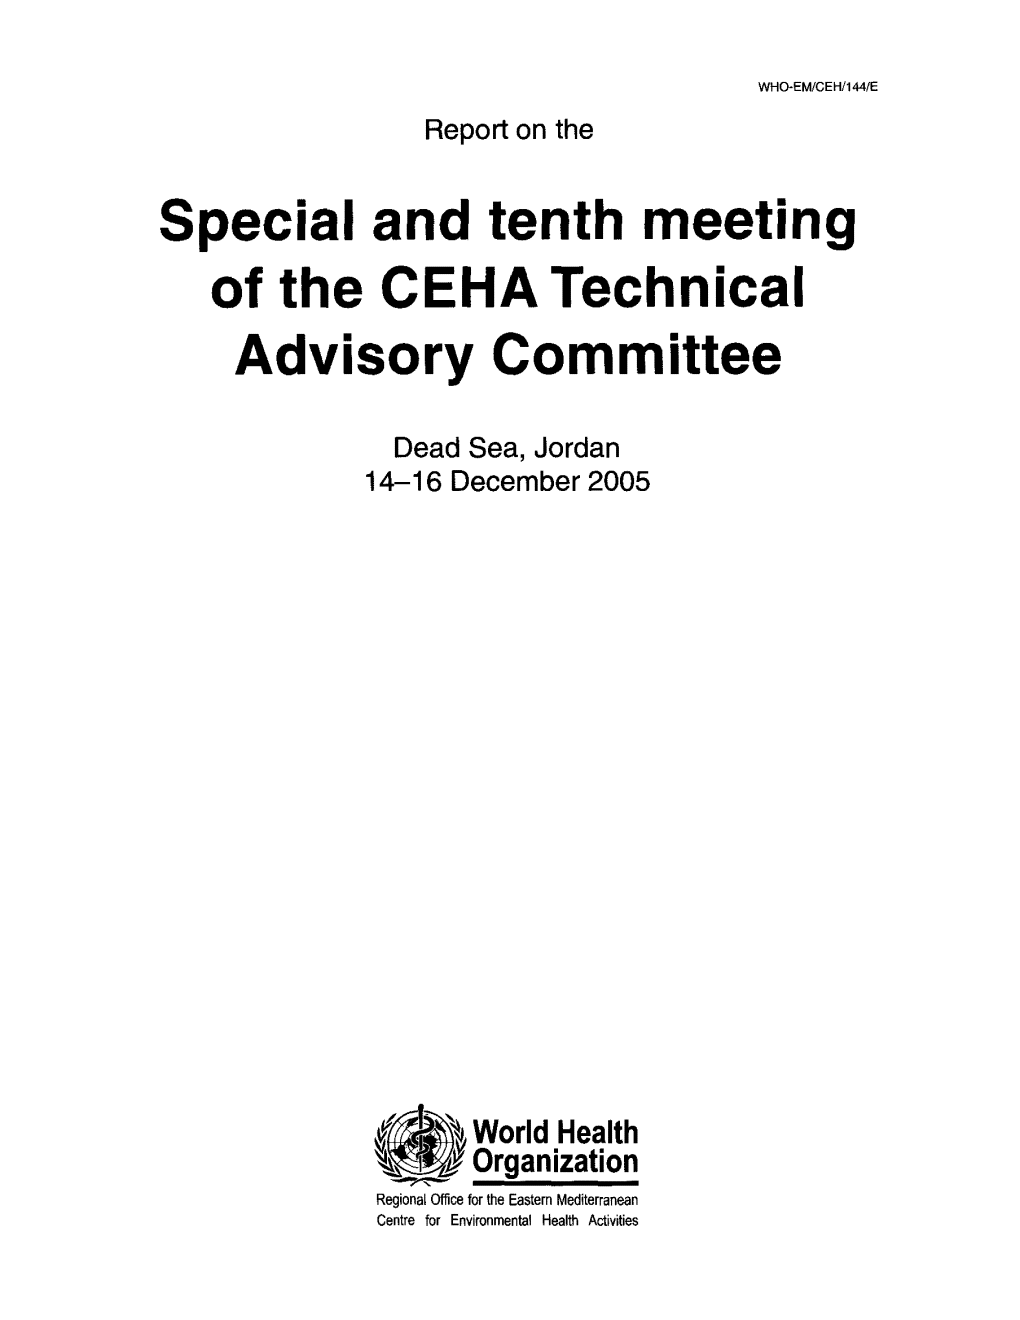 Special and Tenth Meeting of the CEHA Technical Advisory Committee